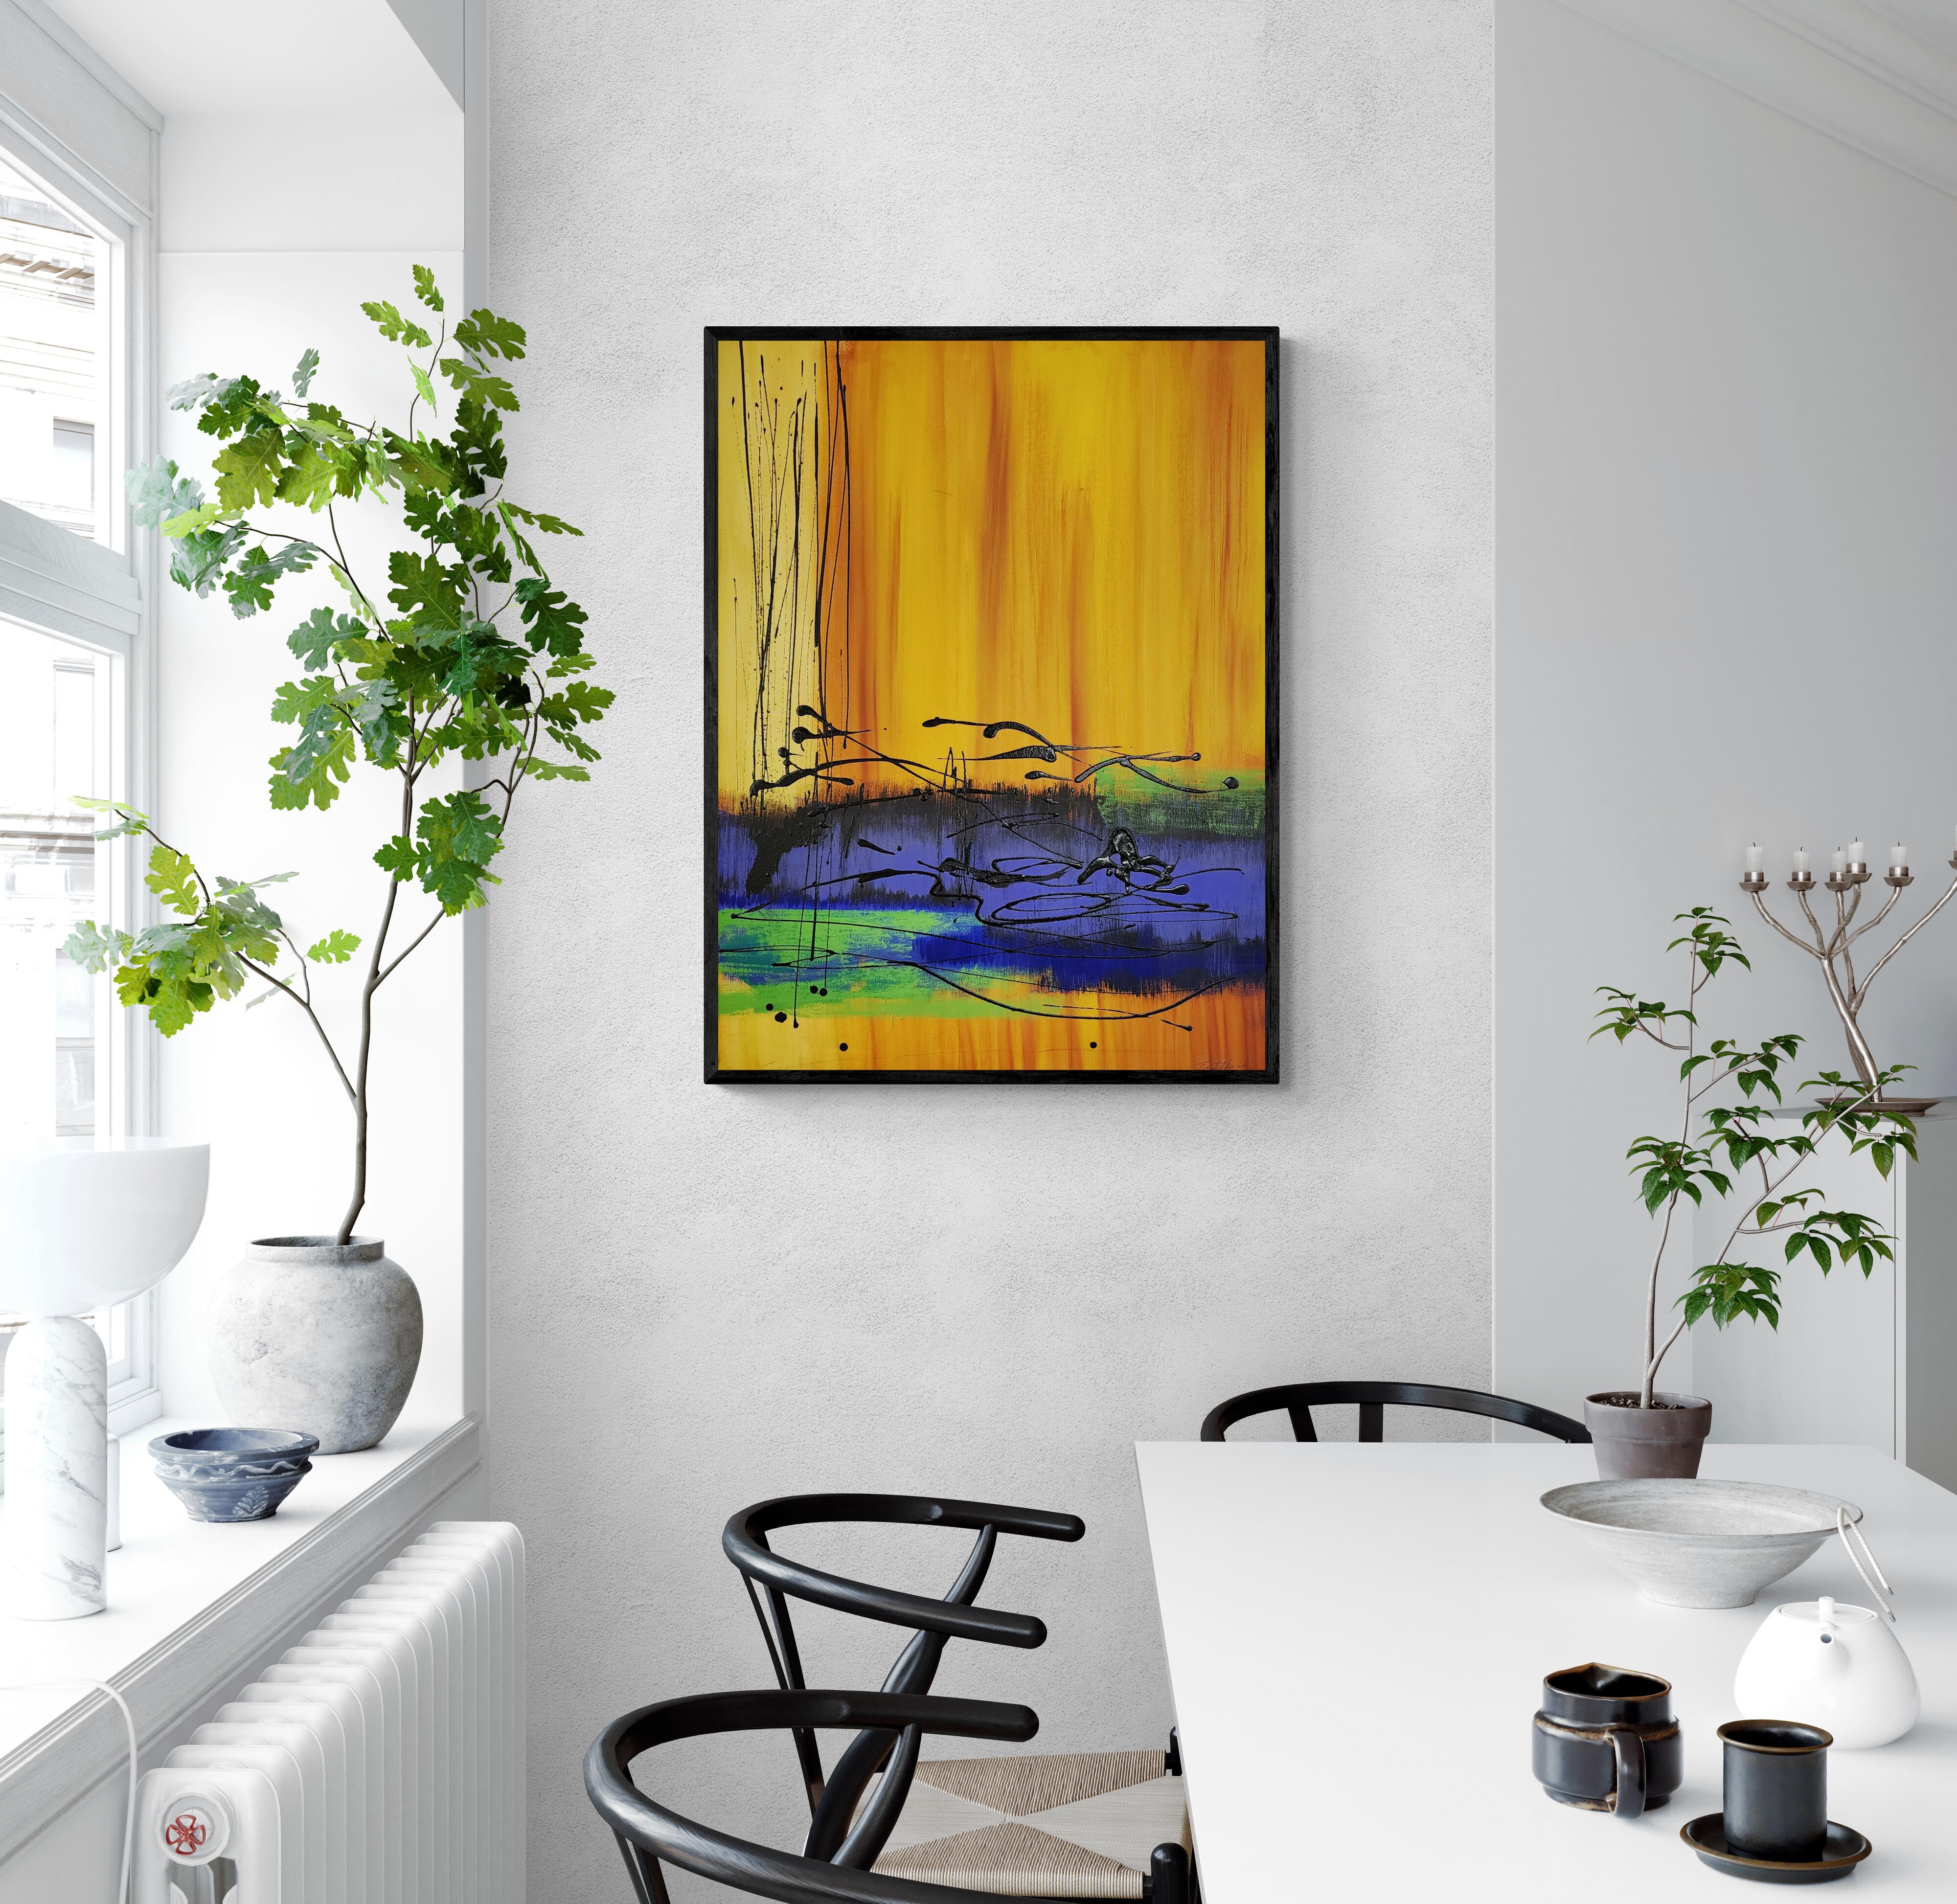 Spirit of Nature (Abstraction, Drips, Orange, Yellow, Blue, Green, Black) - Contemporary Painting by Ted Hinrichs